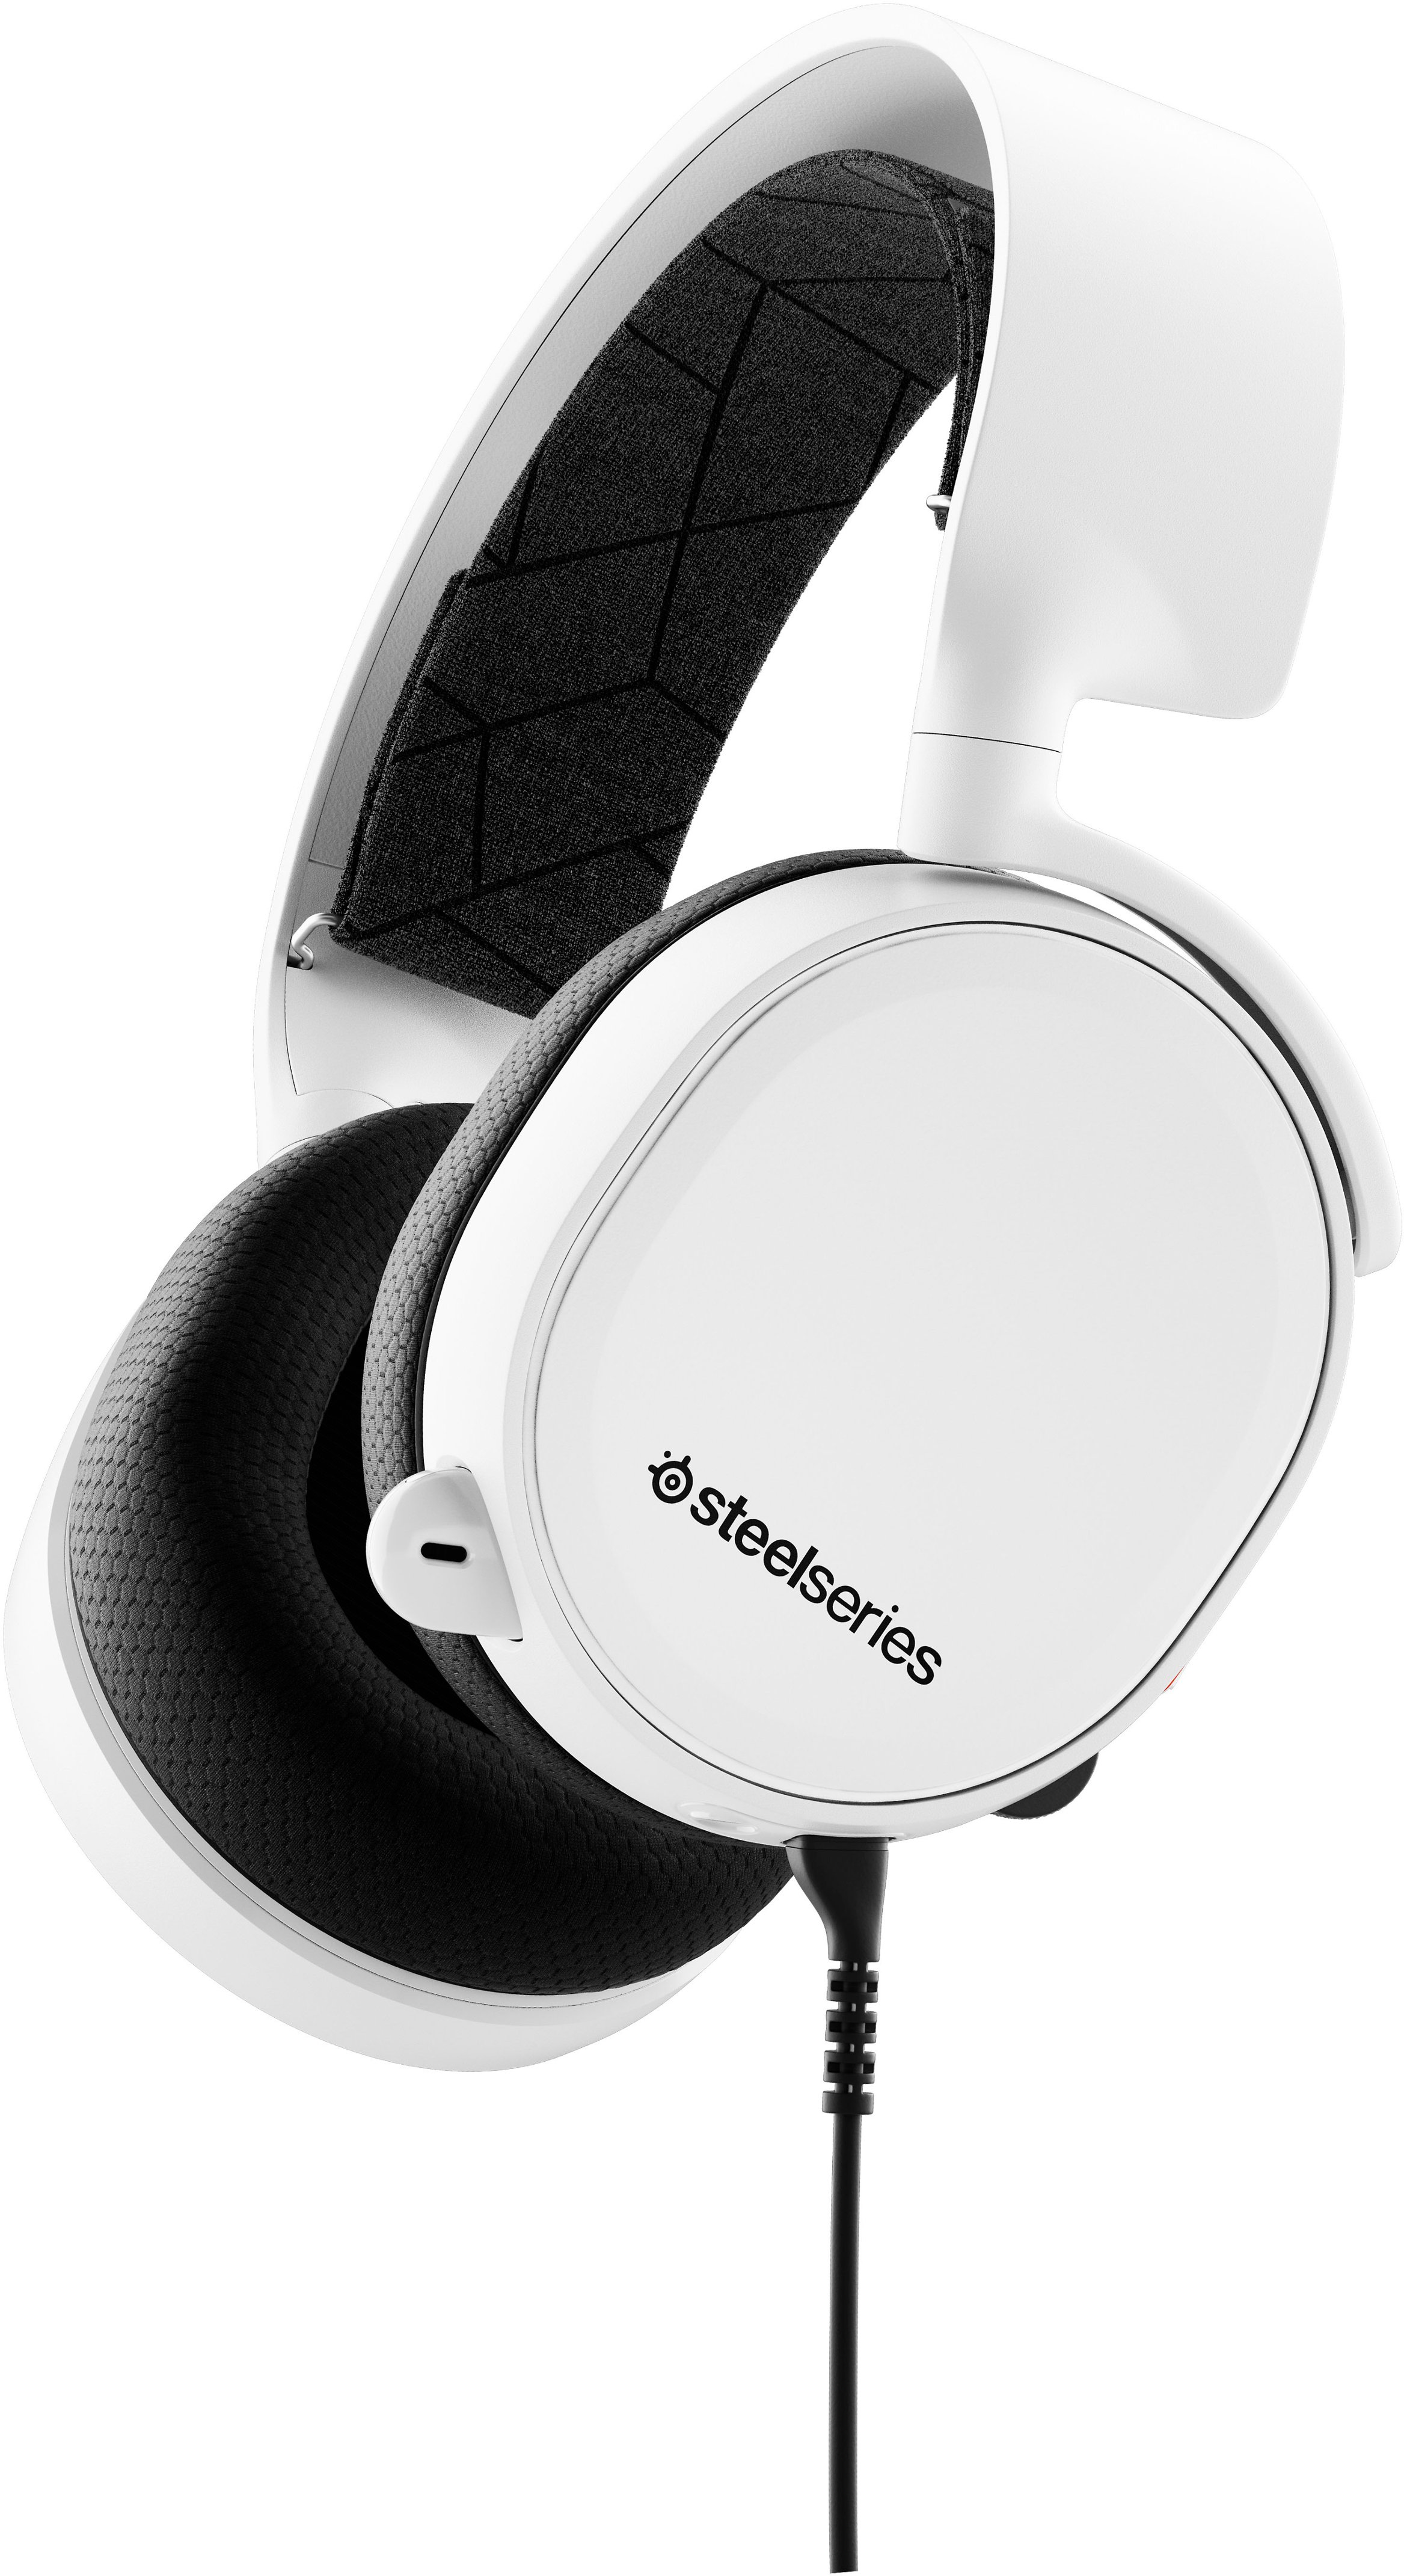 SteelSeries - Arctis 3 Wired Gaming Headset for PlayStation 4|5 - White